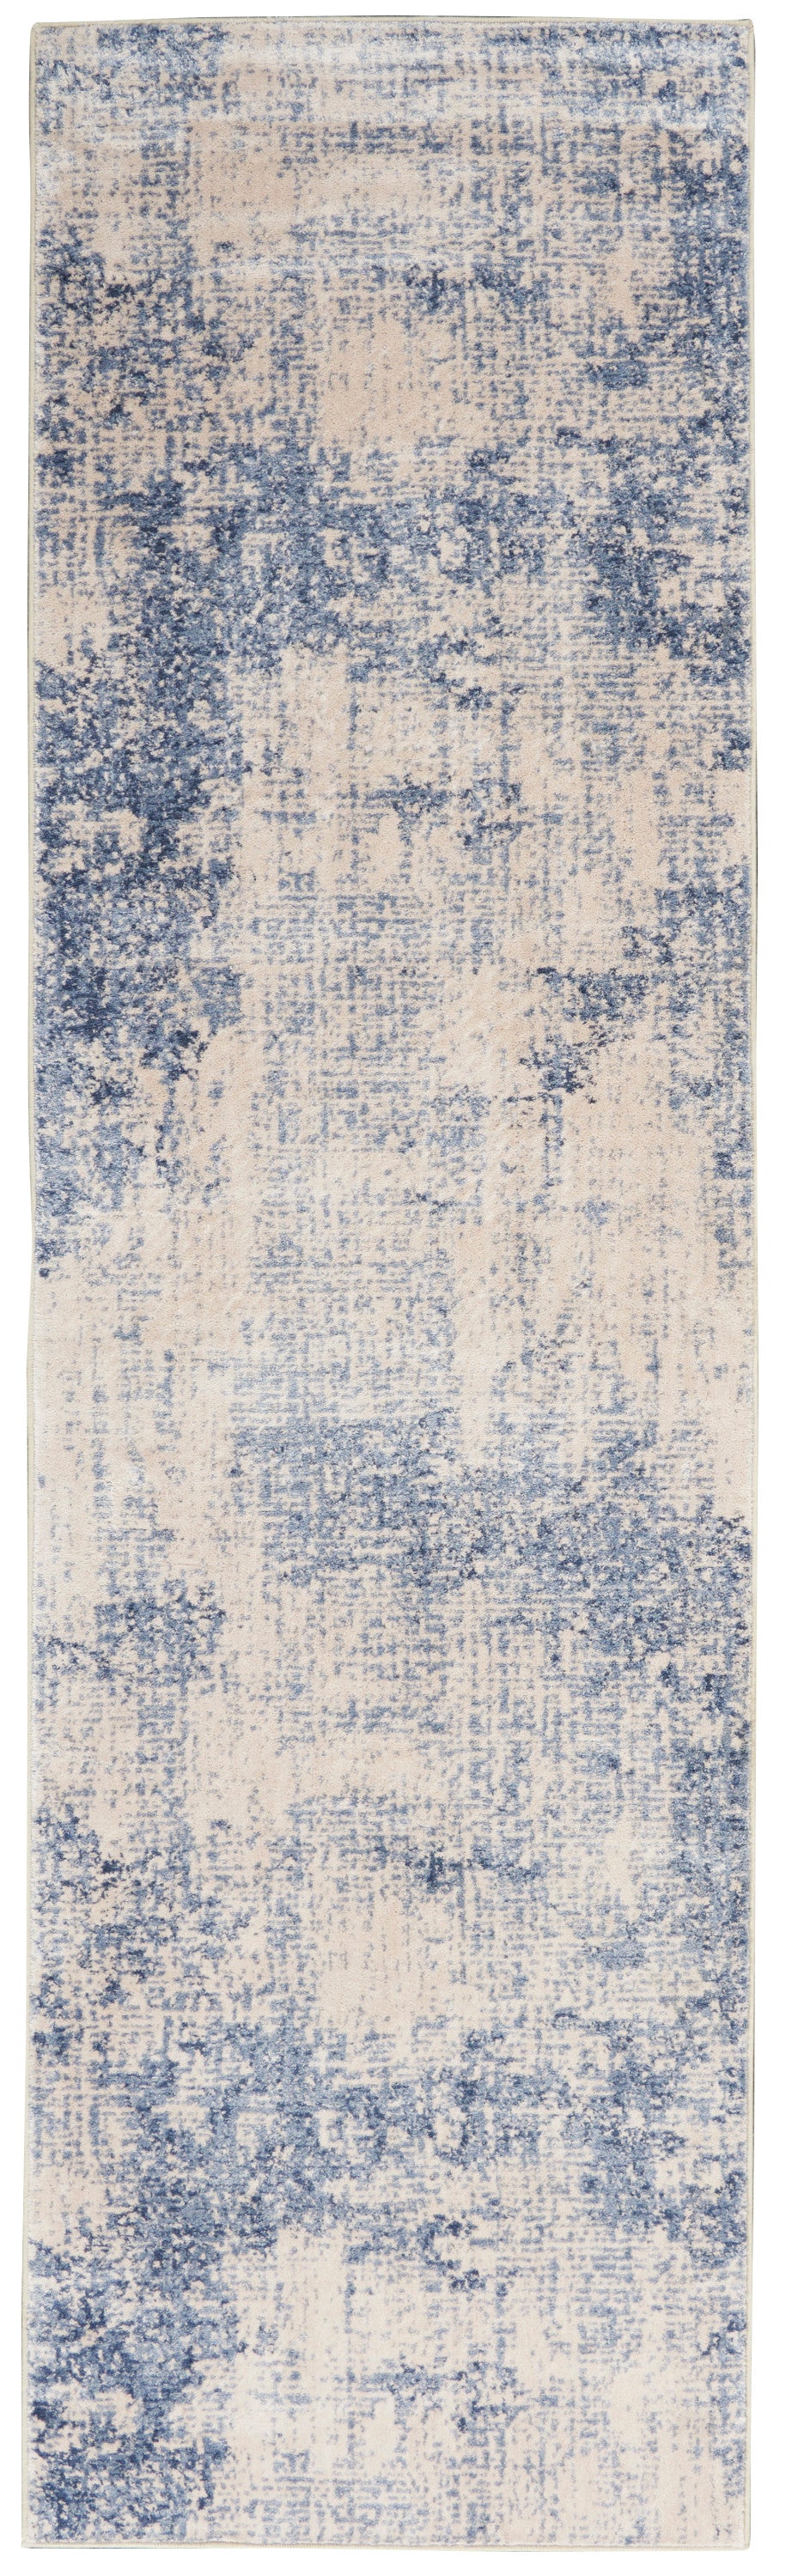 Nourison Home Silky Textures SLY01 Ivory Blue Contemporary Machinemade Rug